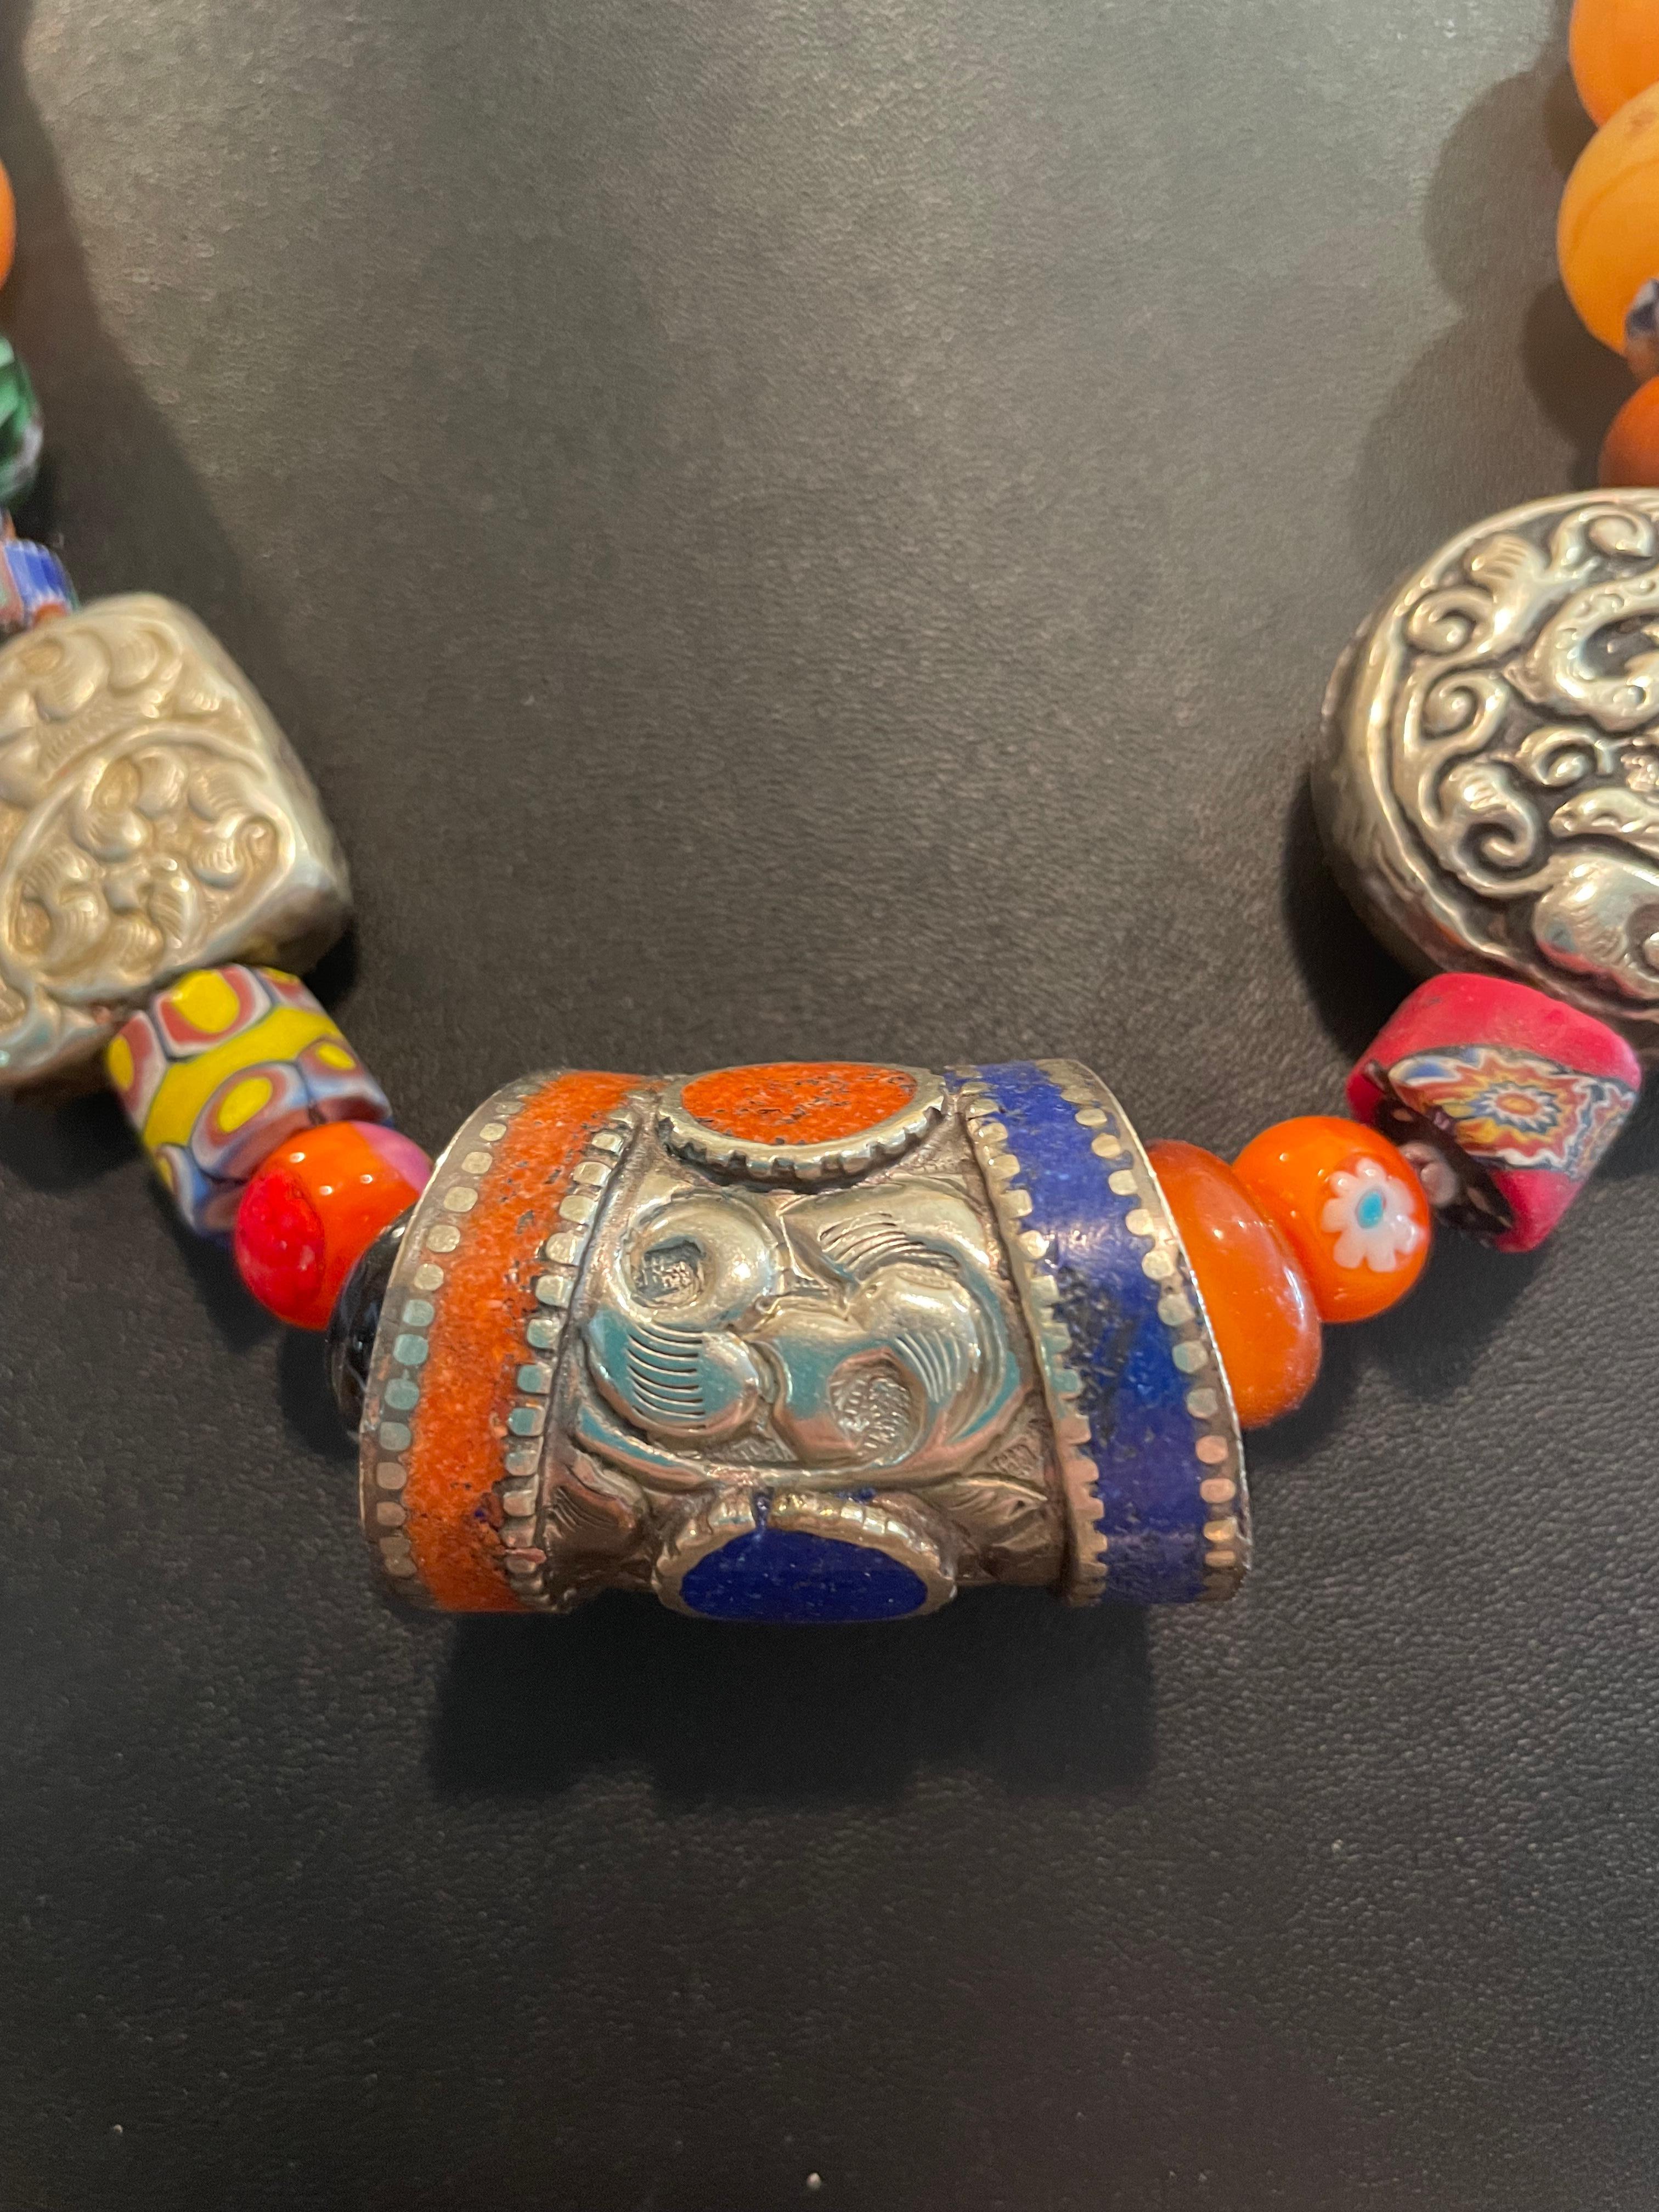 LB offers a Tribal style necklace of Tibetan silver, Afghani inlaid centerpiece, Vintage Venetian glass trade beads,coral,copal amber, Sterling Silver vintage Mexican beads.
The end cones are Silver from Thailand. This is a chunky piece that will